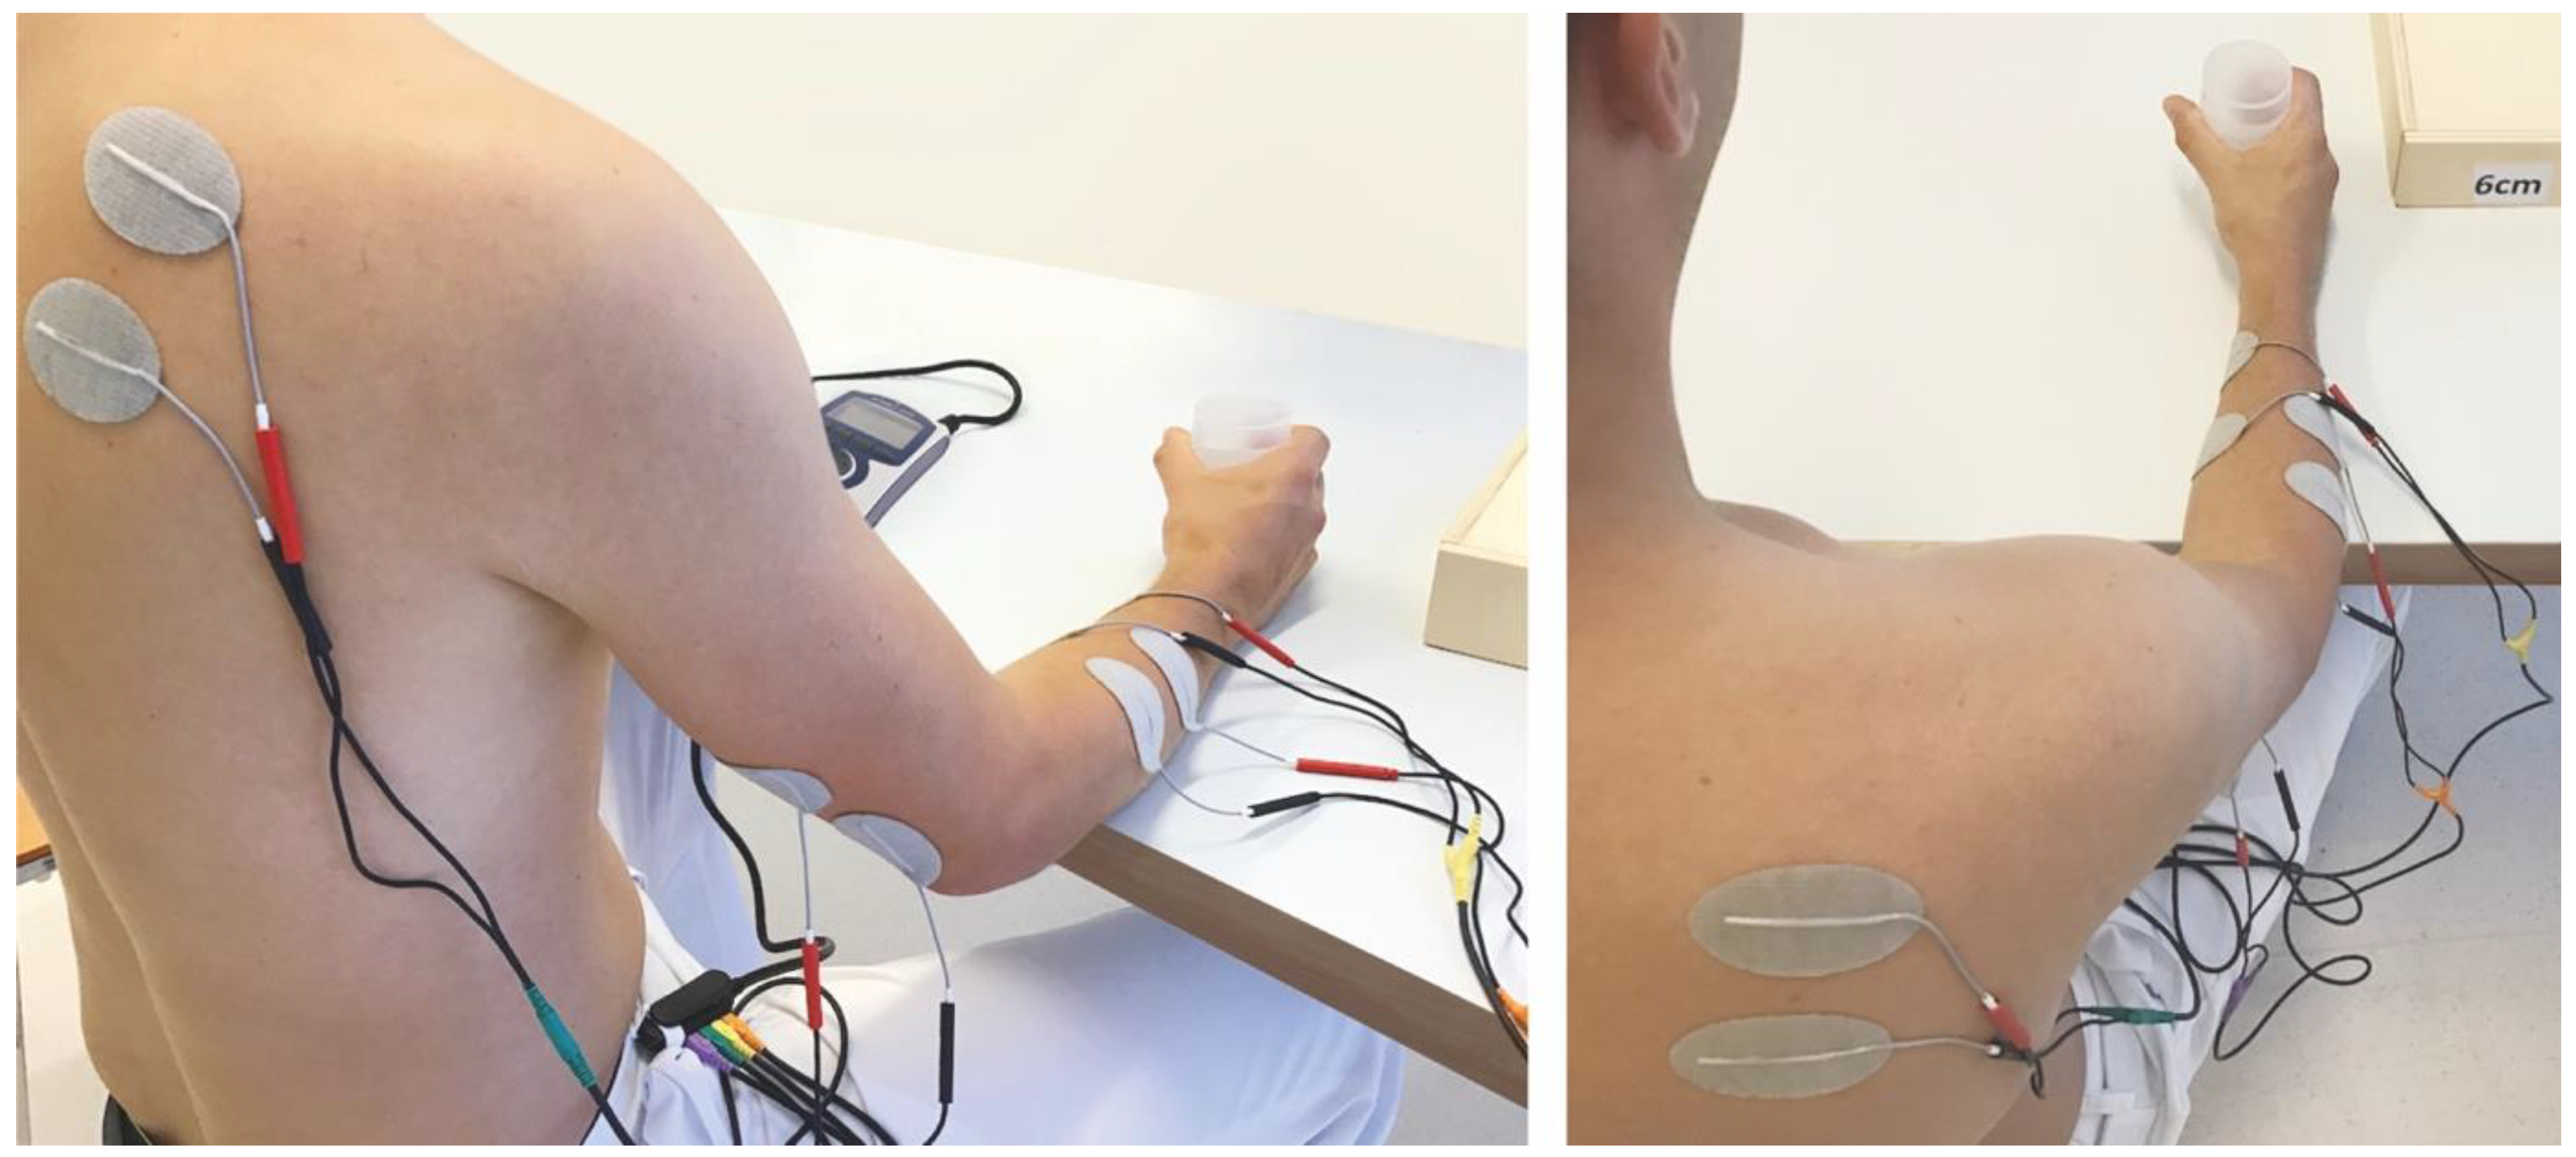 Electrode Placement for Electric Stimulation Charts